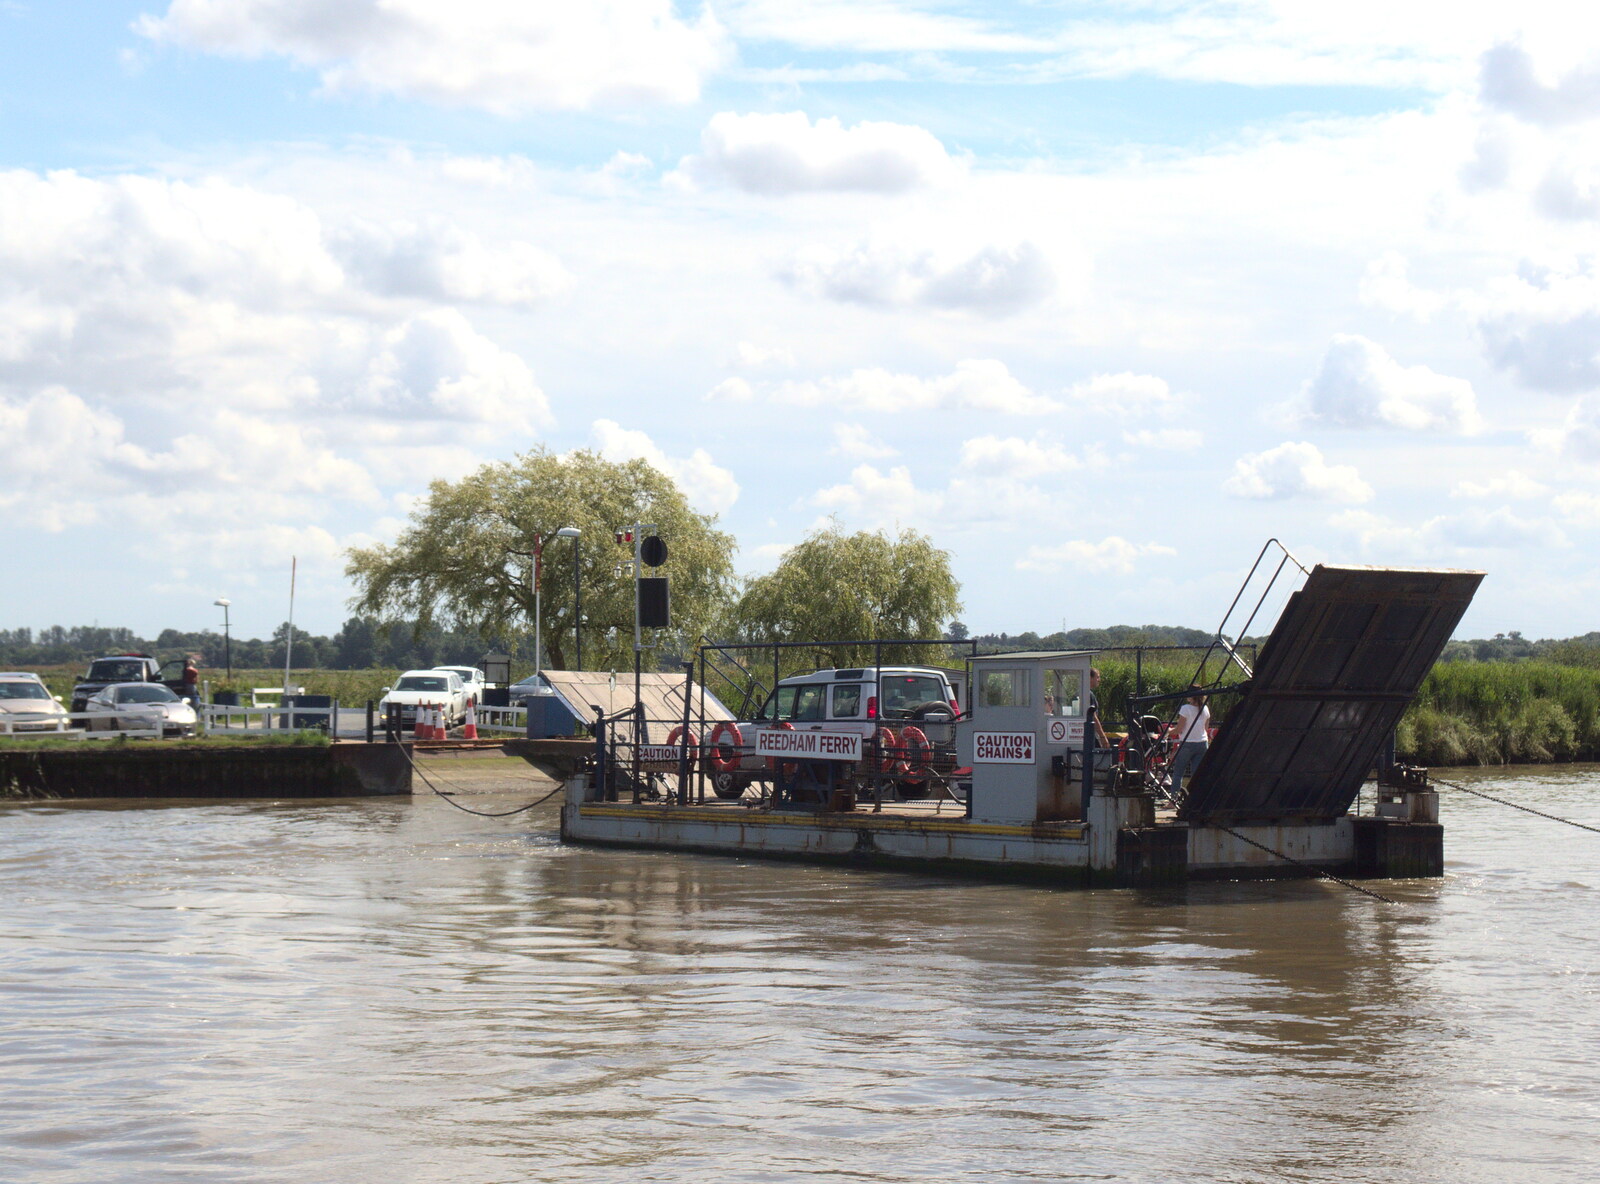 The quaint (actual) Reedham Ferry from The Humpty Dumpty Beer Festival, Reedham, Norfolk - 22nd July 2017